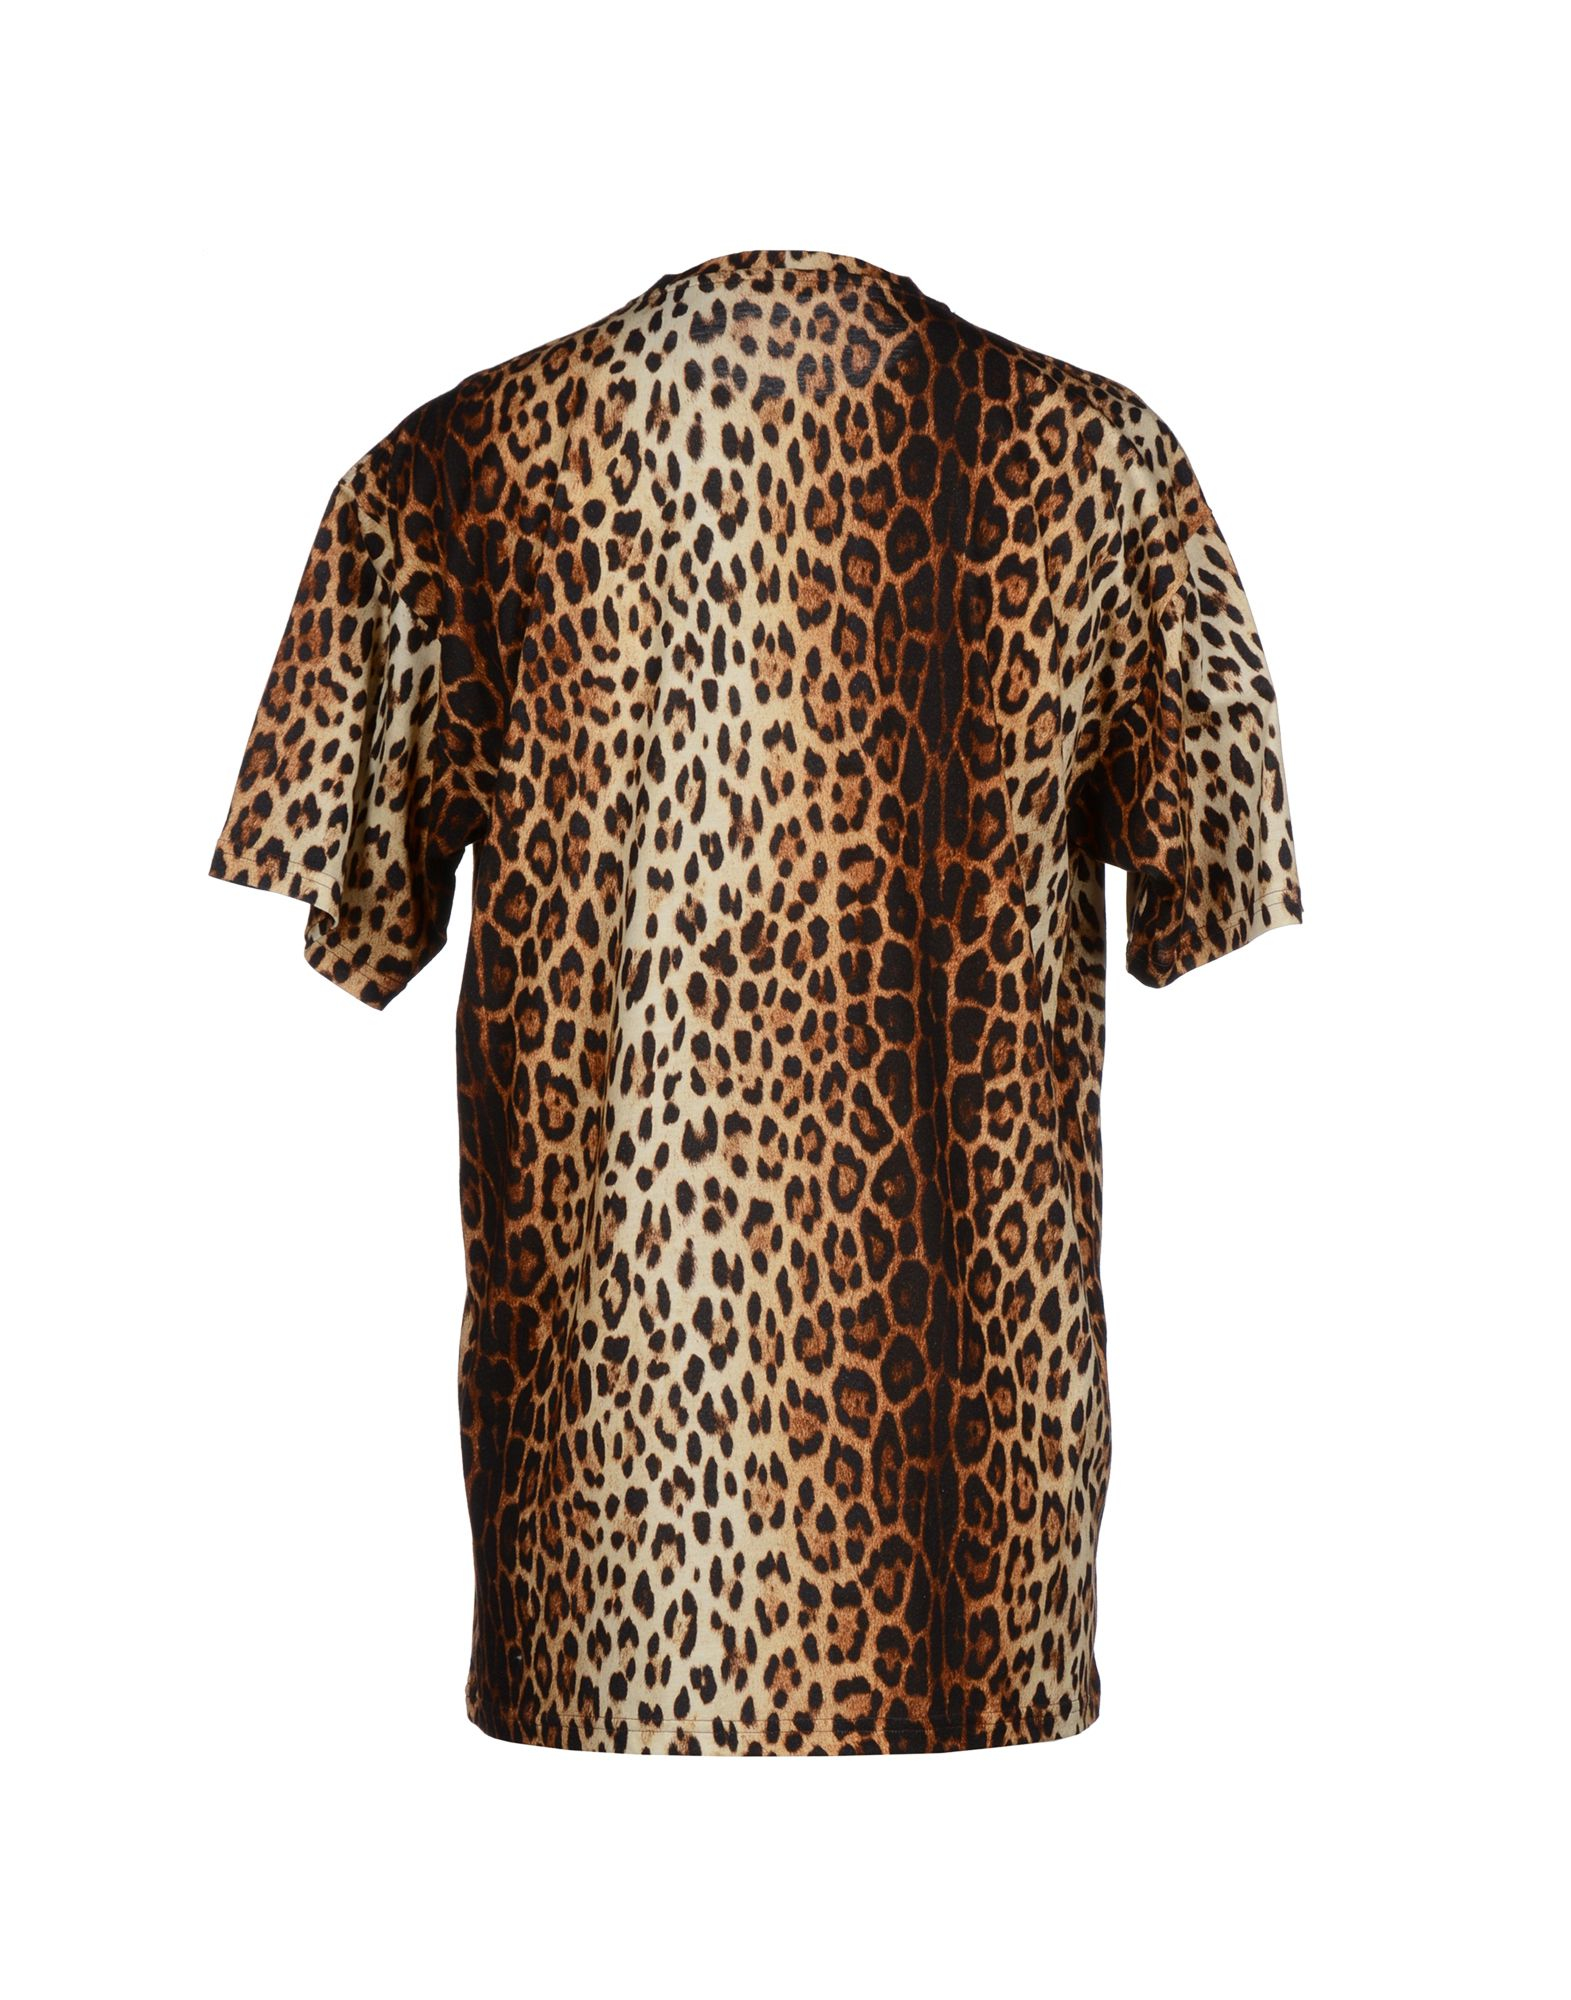 Moschino Leopard Print T-Shirt in Brown for Men - Lyst